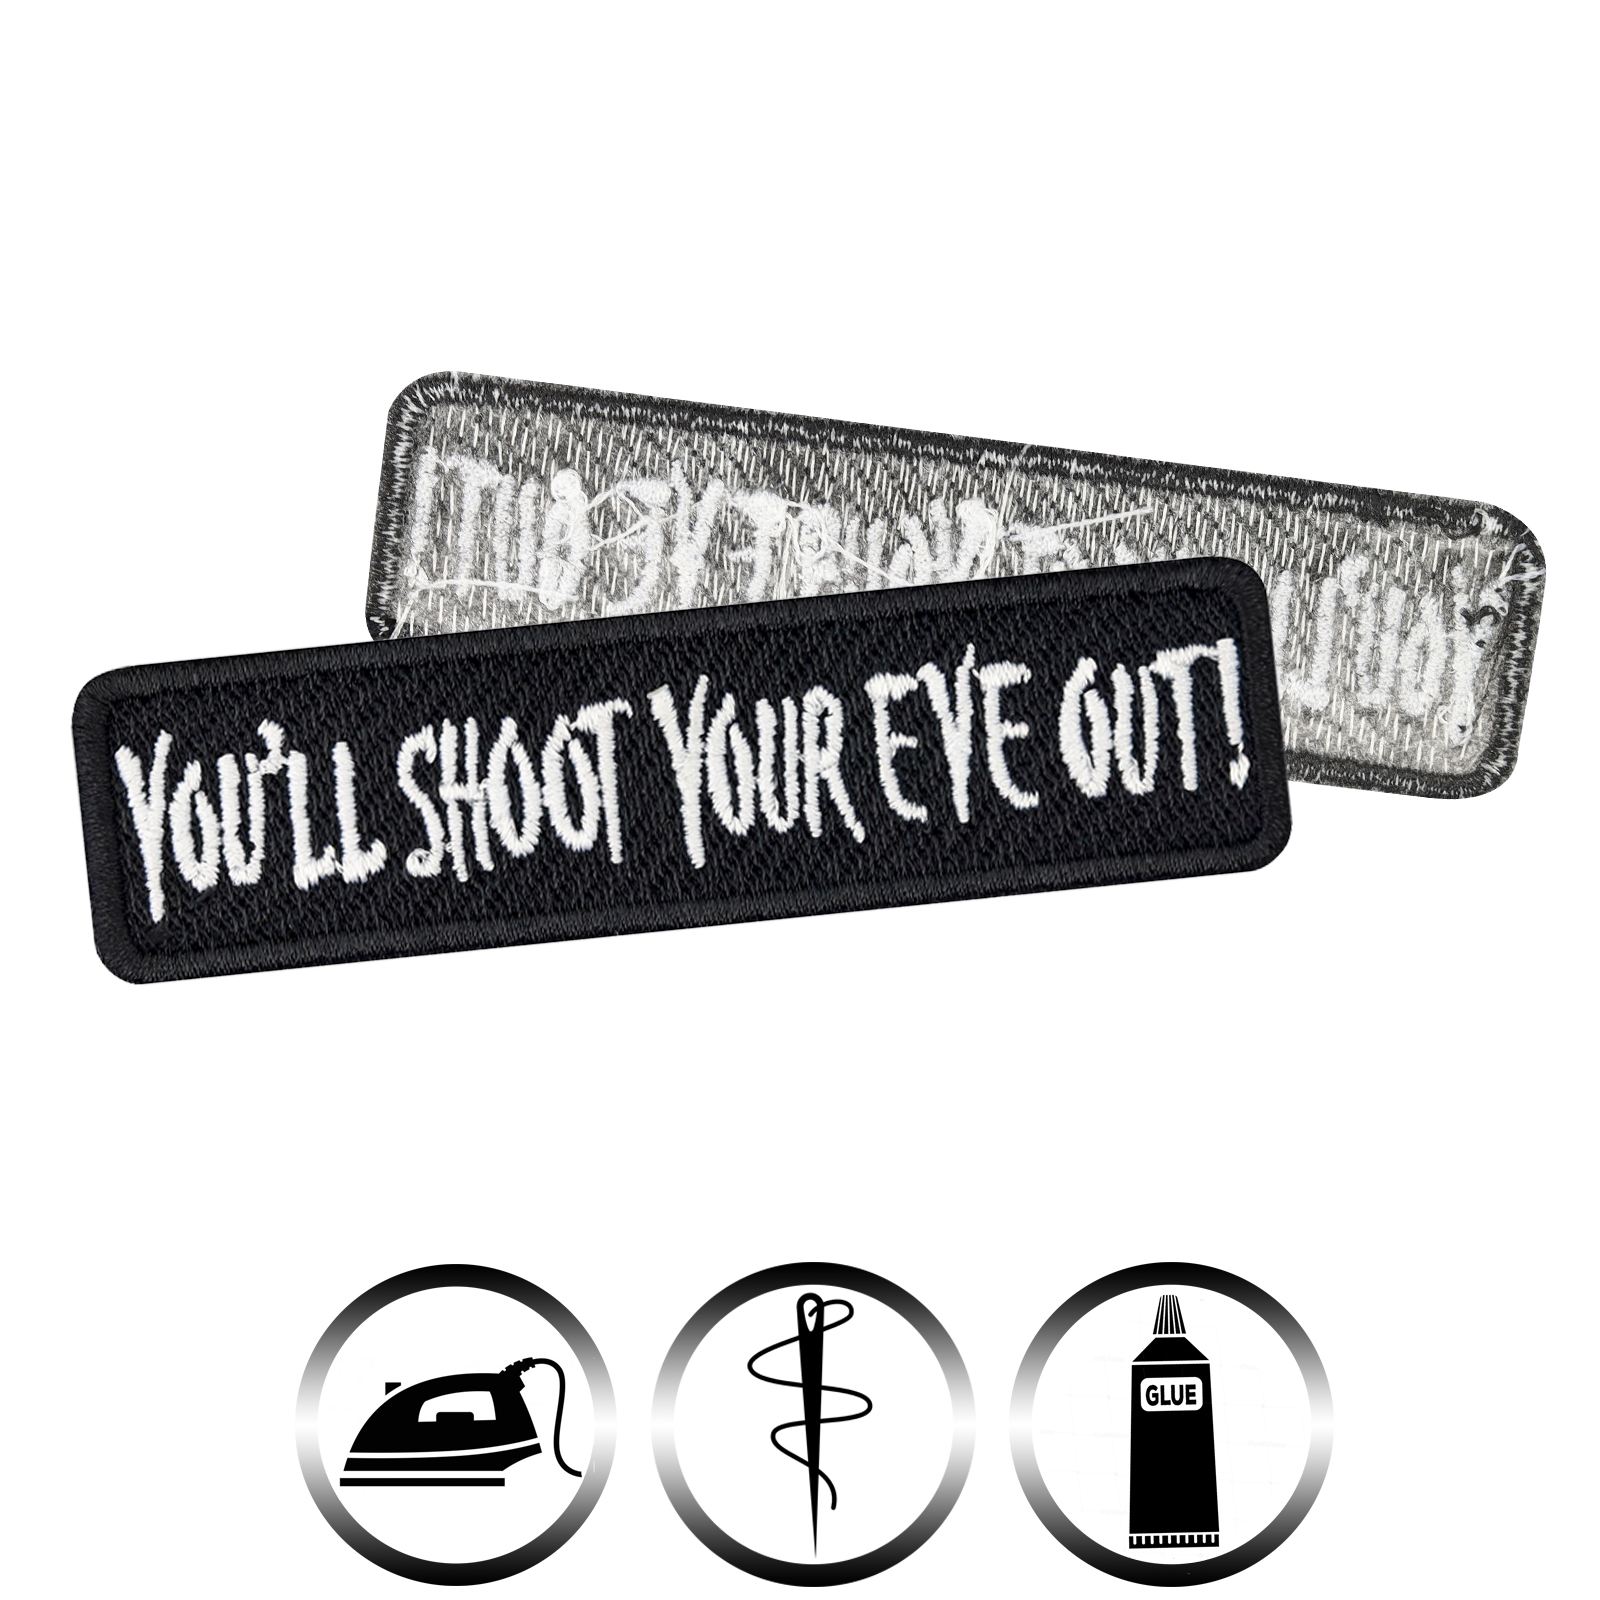 You´ll shoot your eye out! - Patch